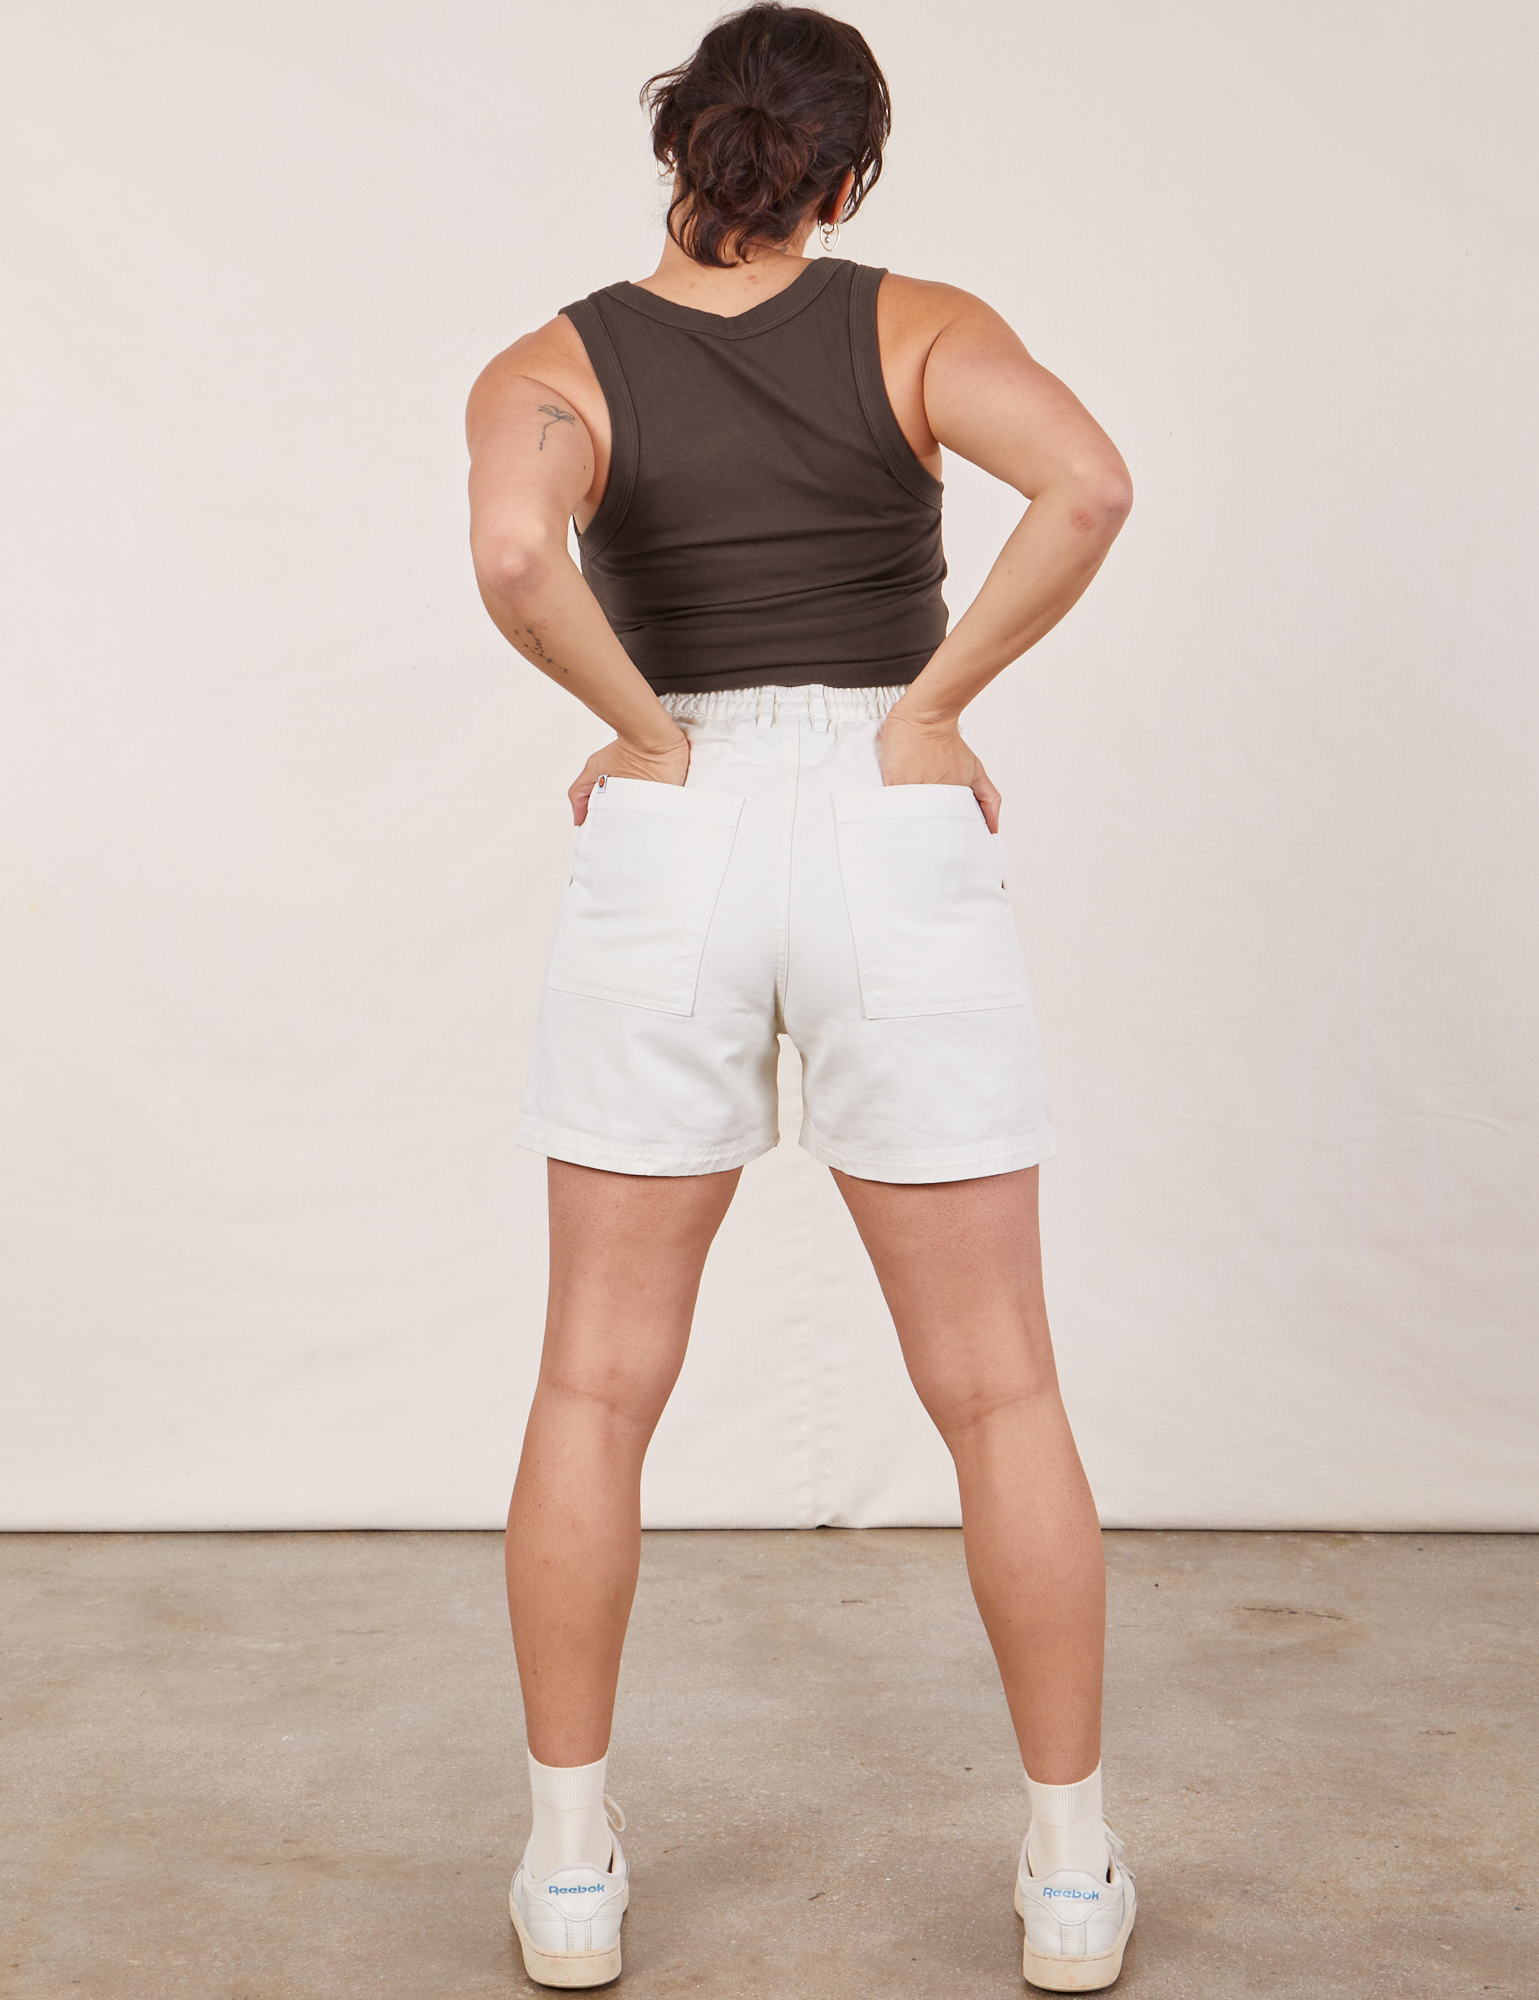 Back view of Classic Work Shorts in Vintage Tee Off-White and espresso brown Cropped Tank Top on Tiara